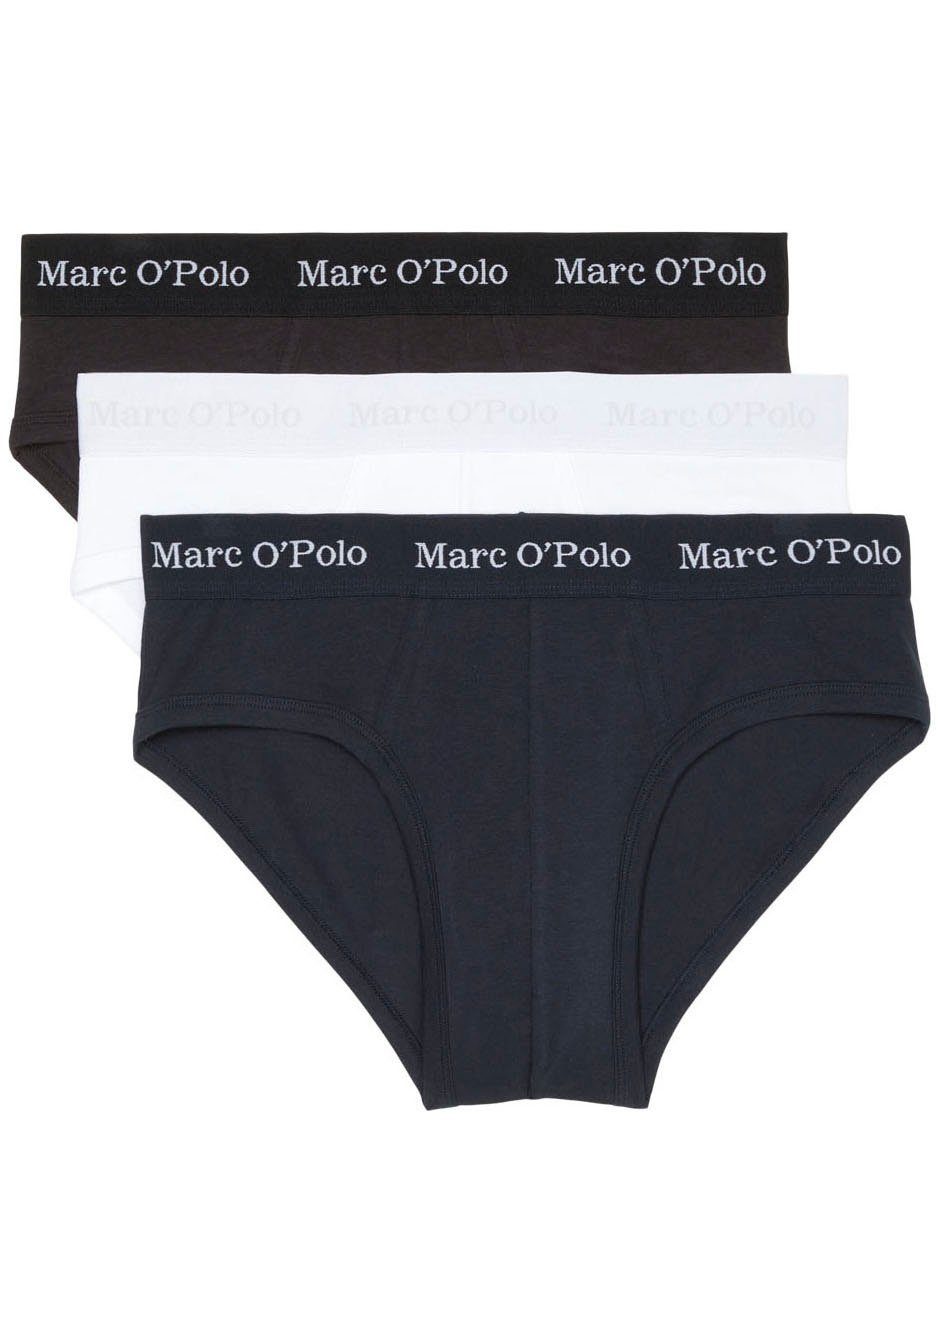 3-St) (Packung, Slip Marc O'Polo